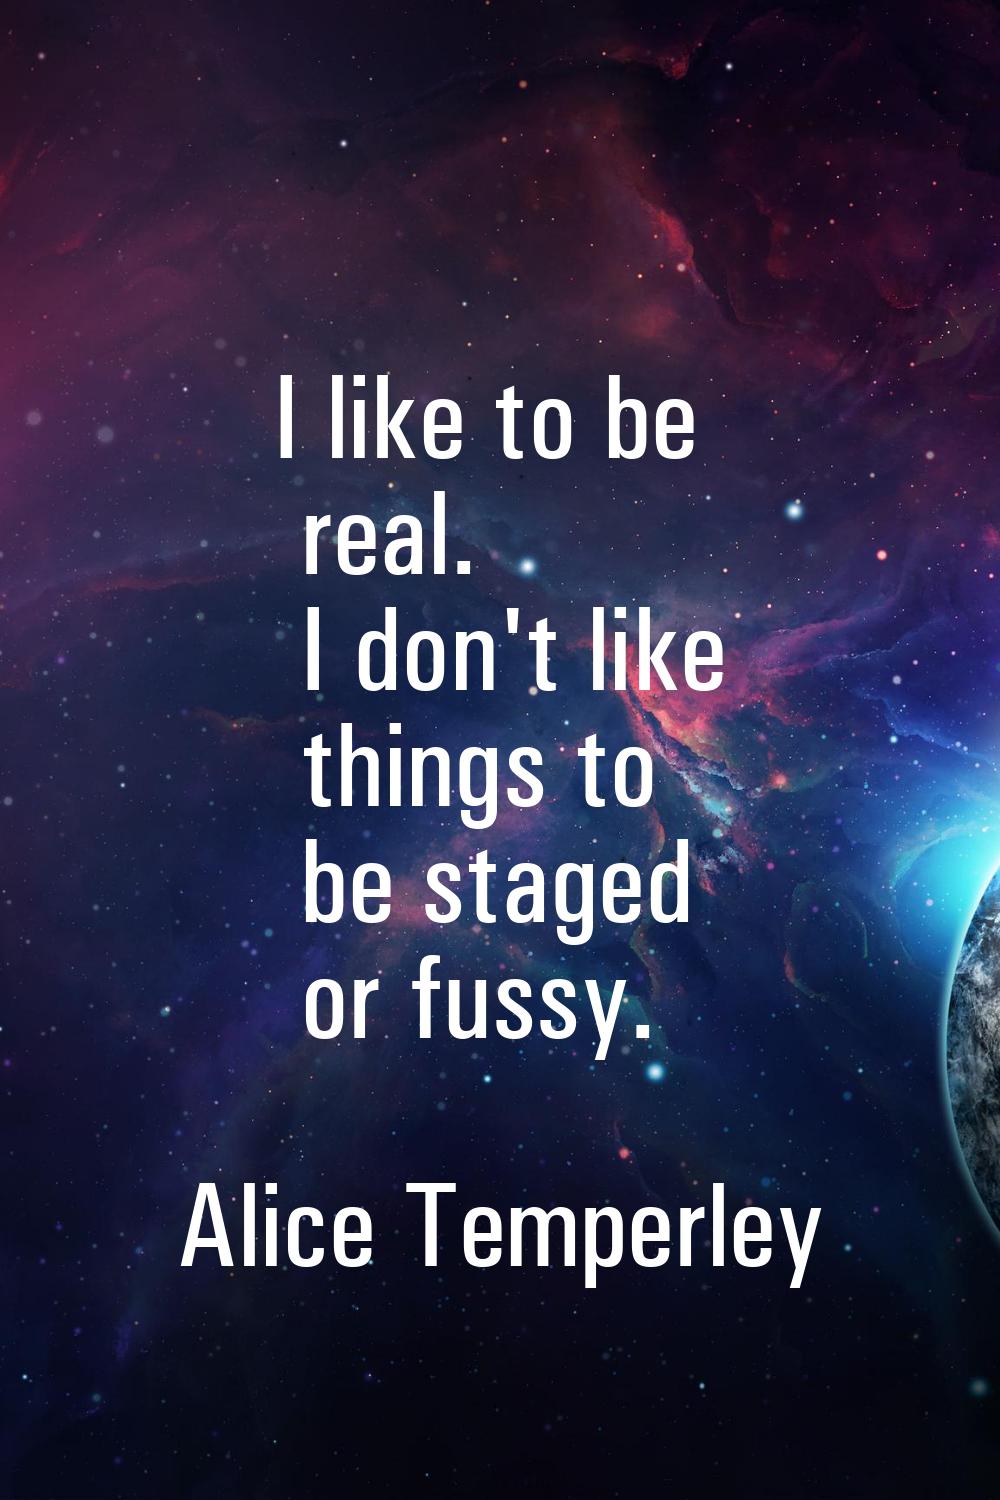 I like to be real. I don't like things to be staged or fussy.